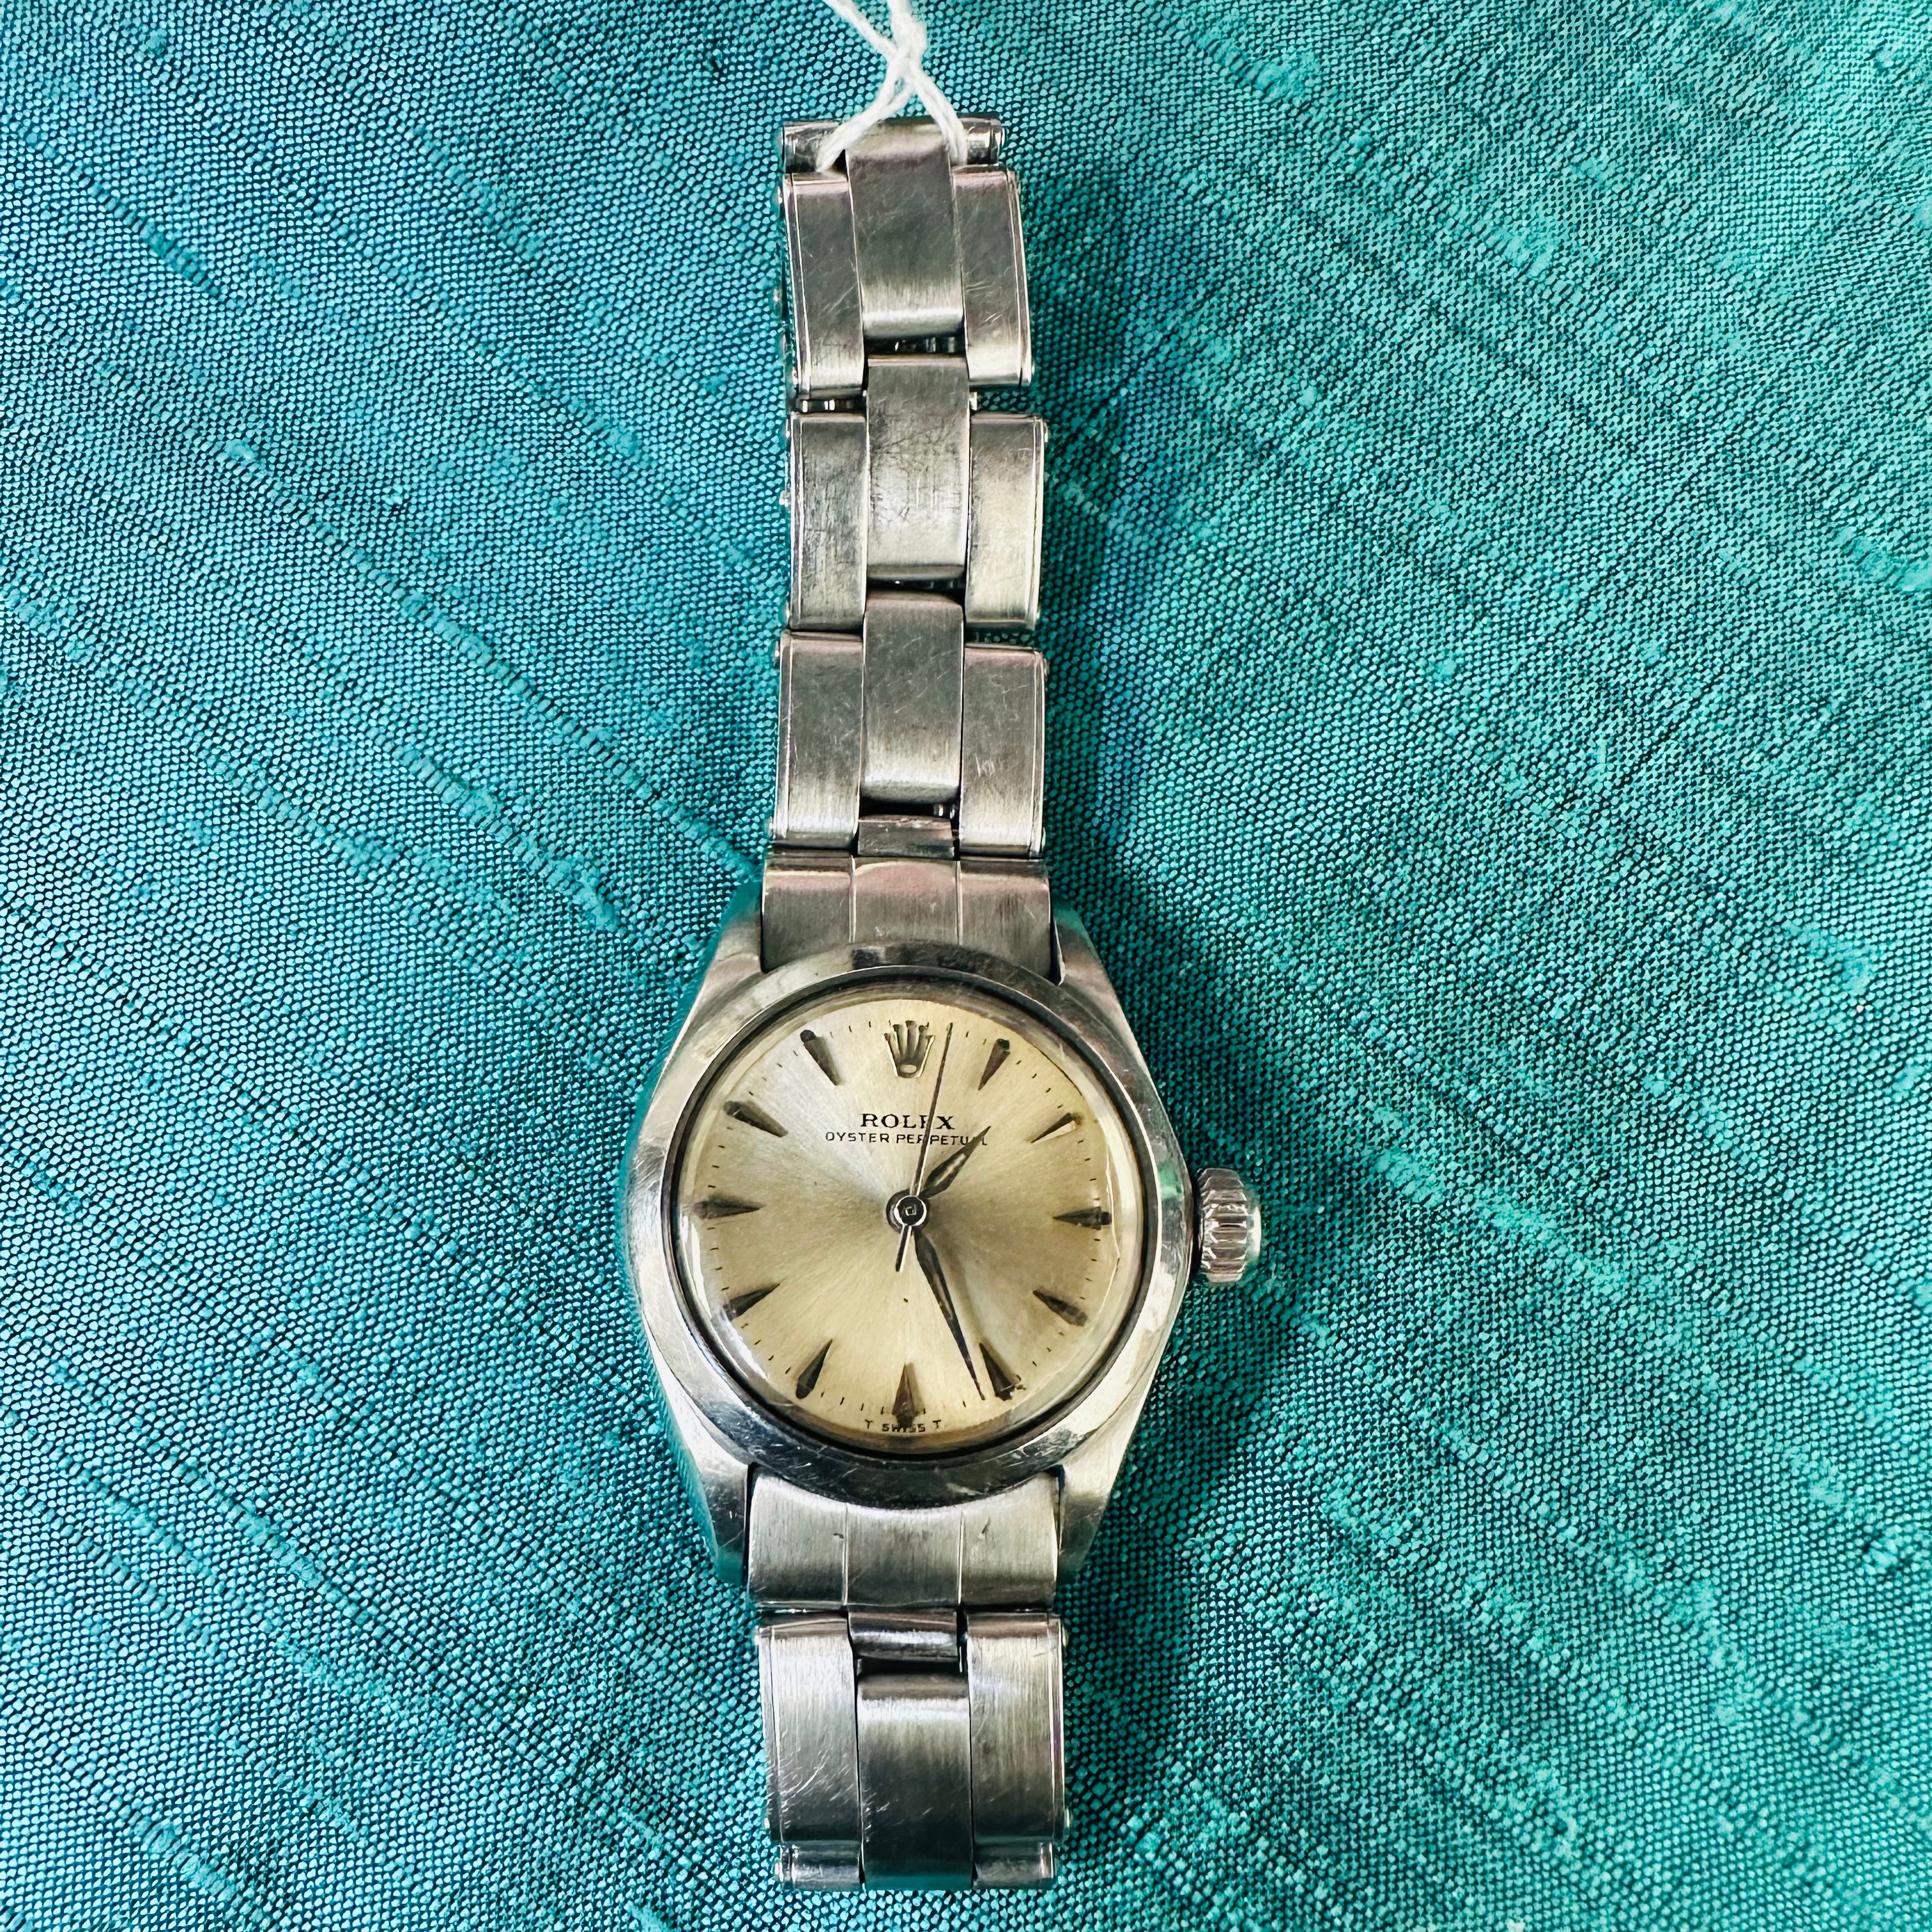 26mm Rolex Stainless Steel Oyster Perpetual